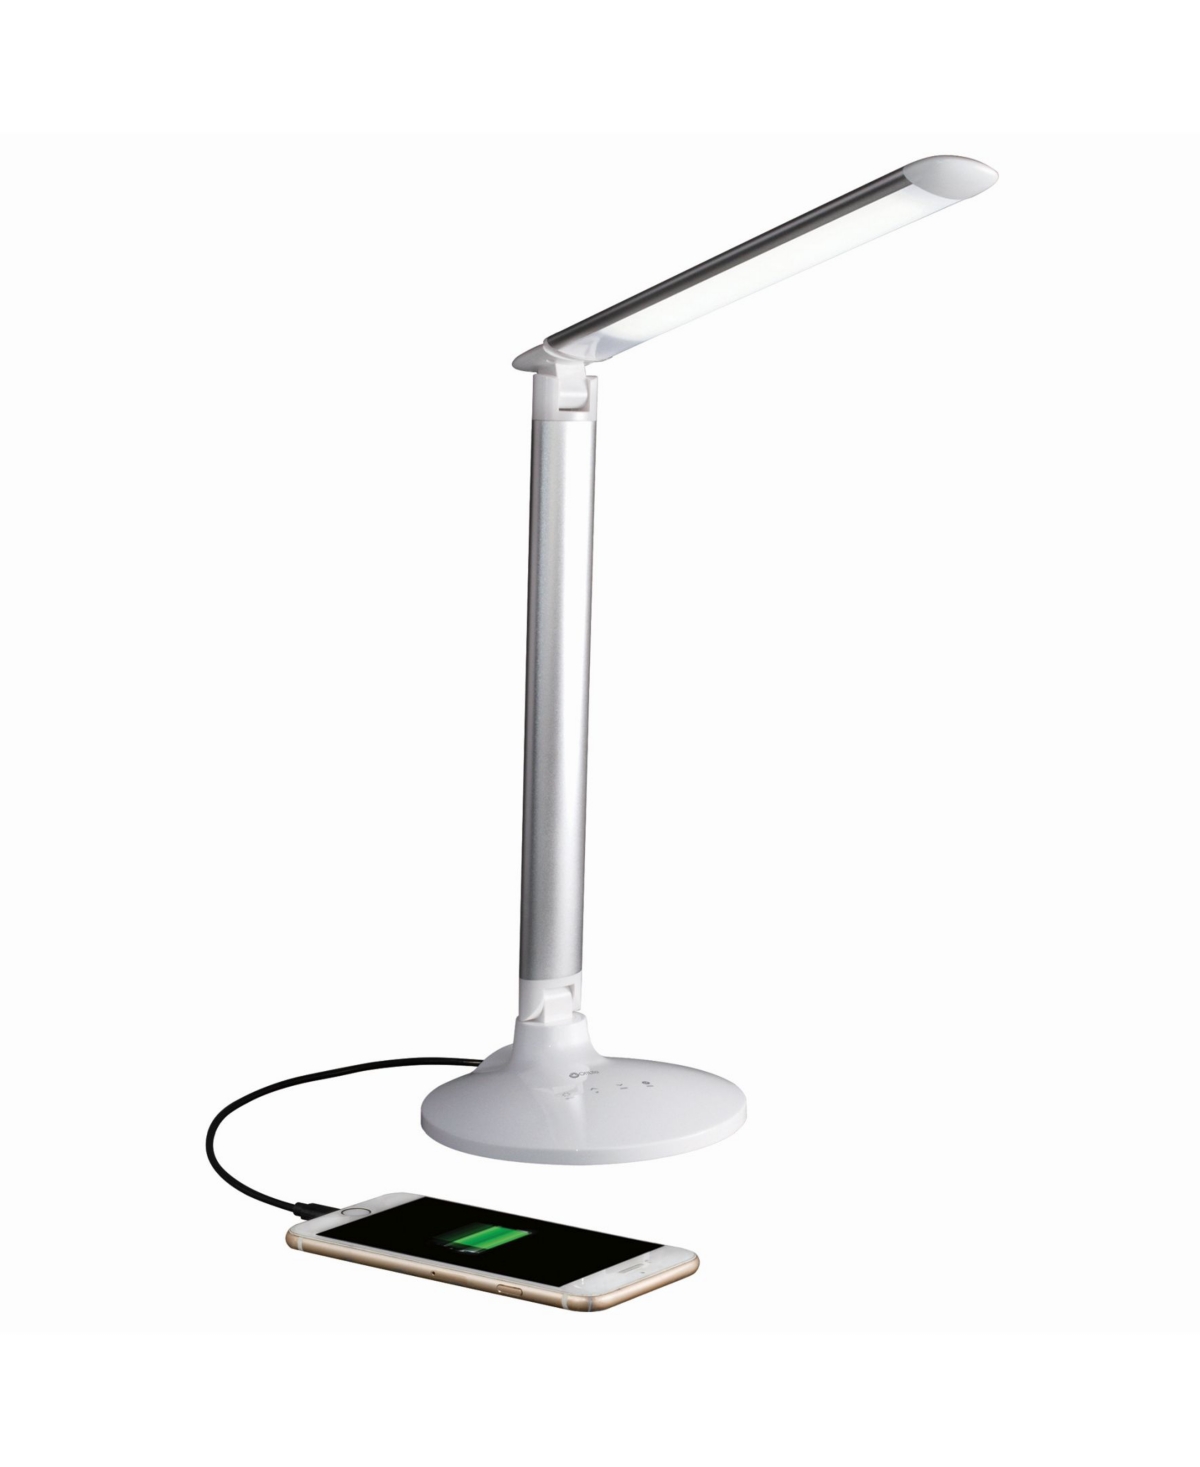 OttLite Command Led Desk Lamp with Voice Assistant Works with Google Home and Amazon Alexa